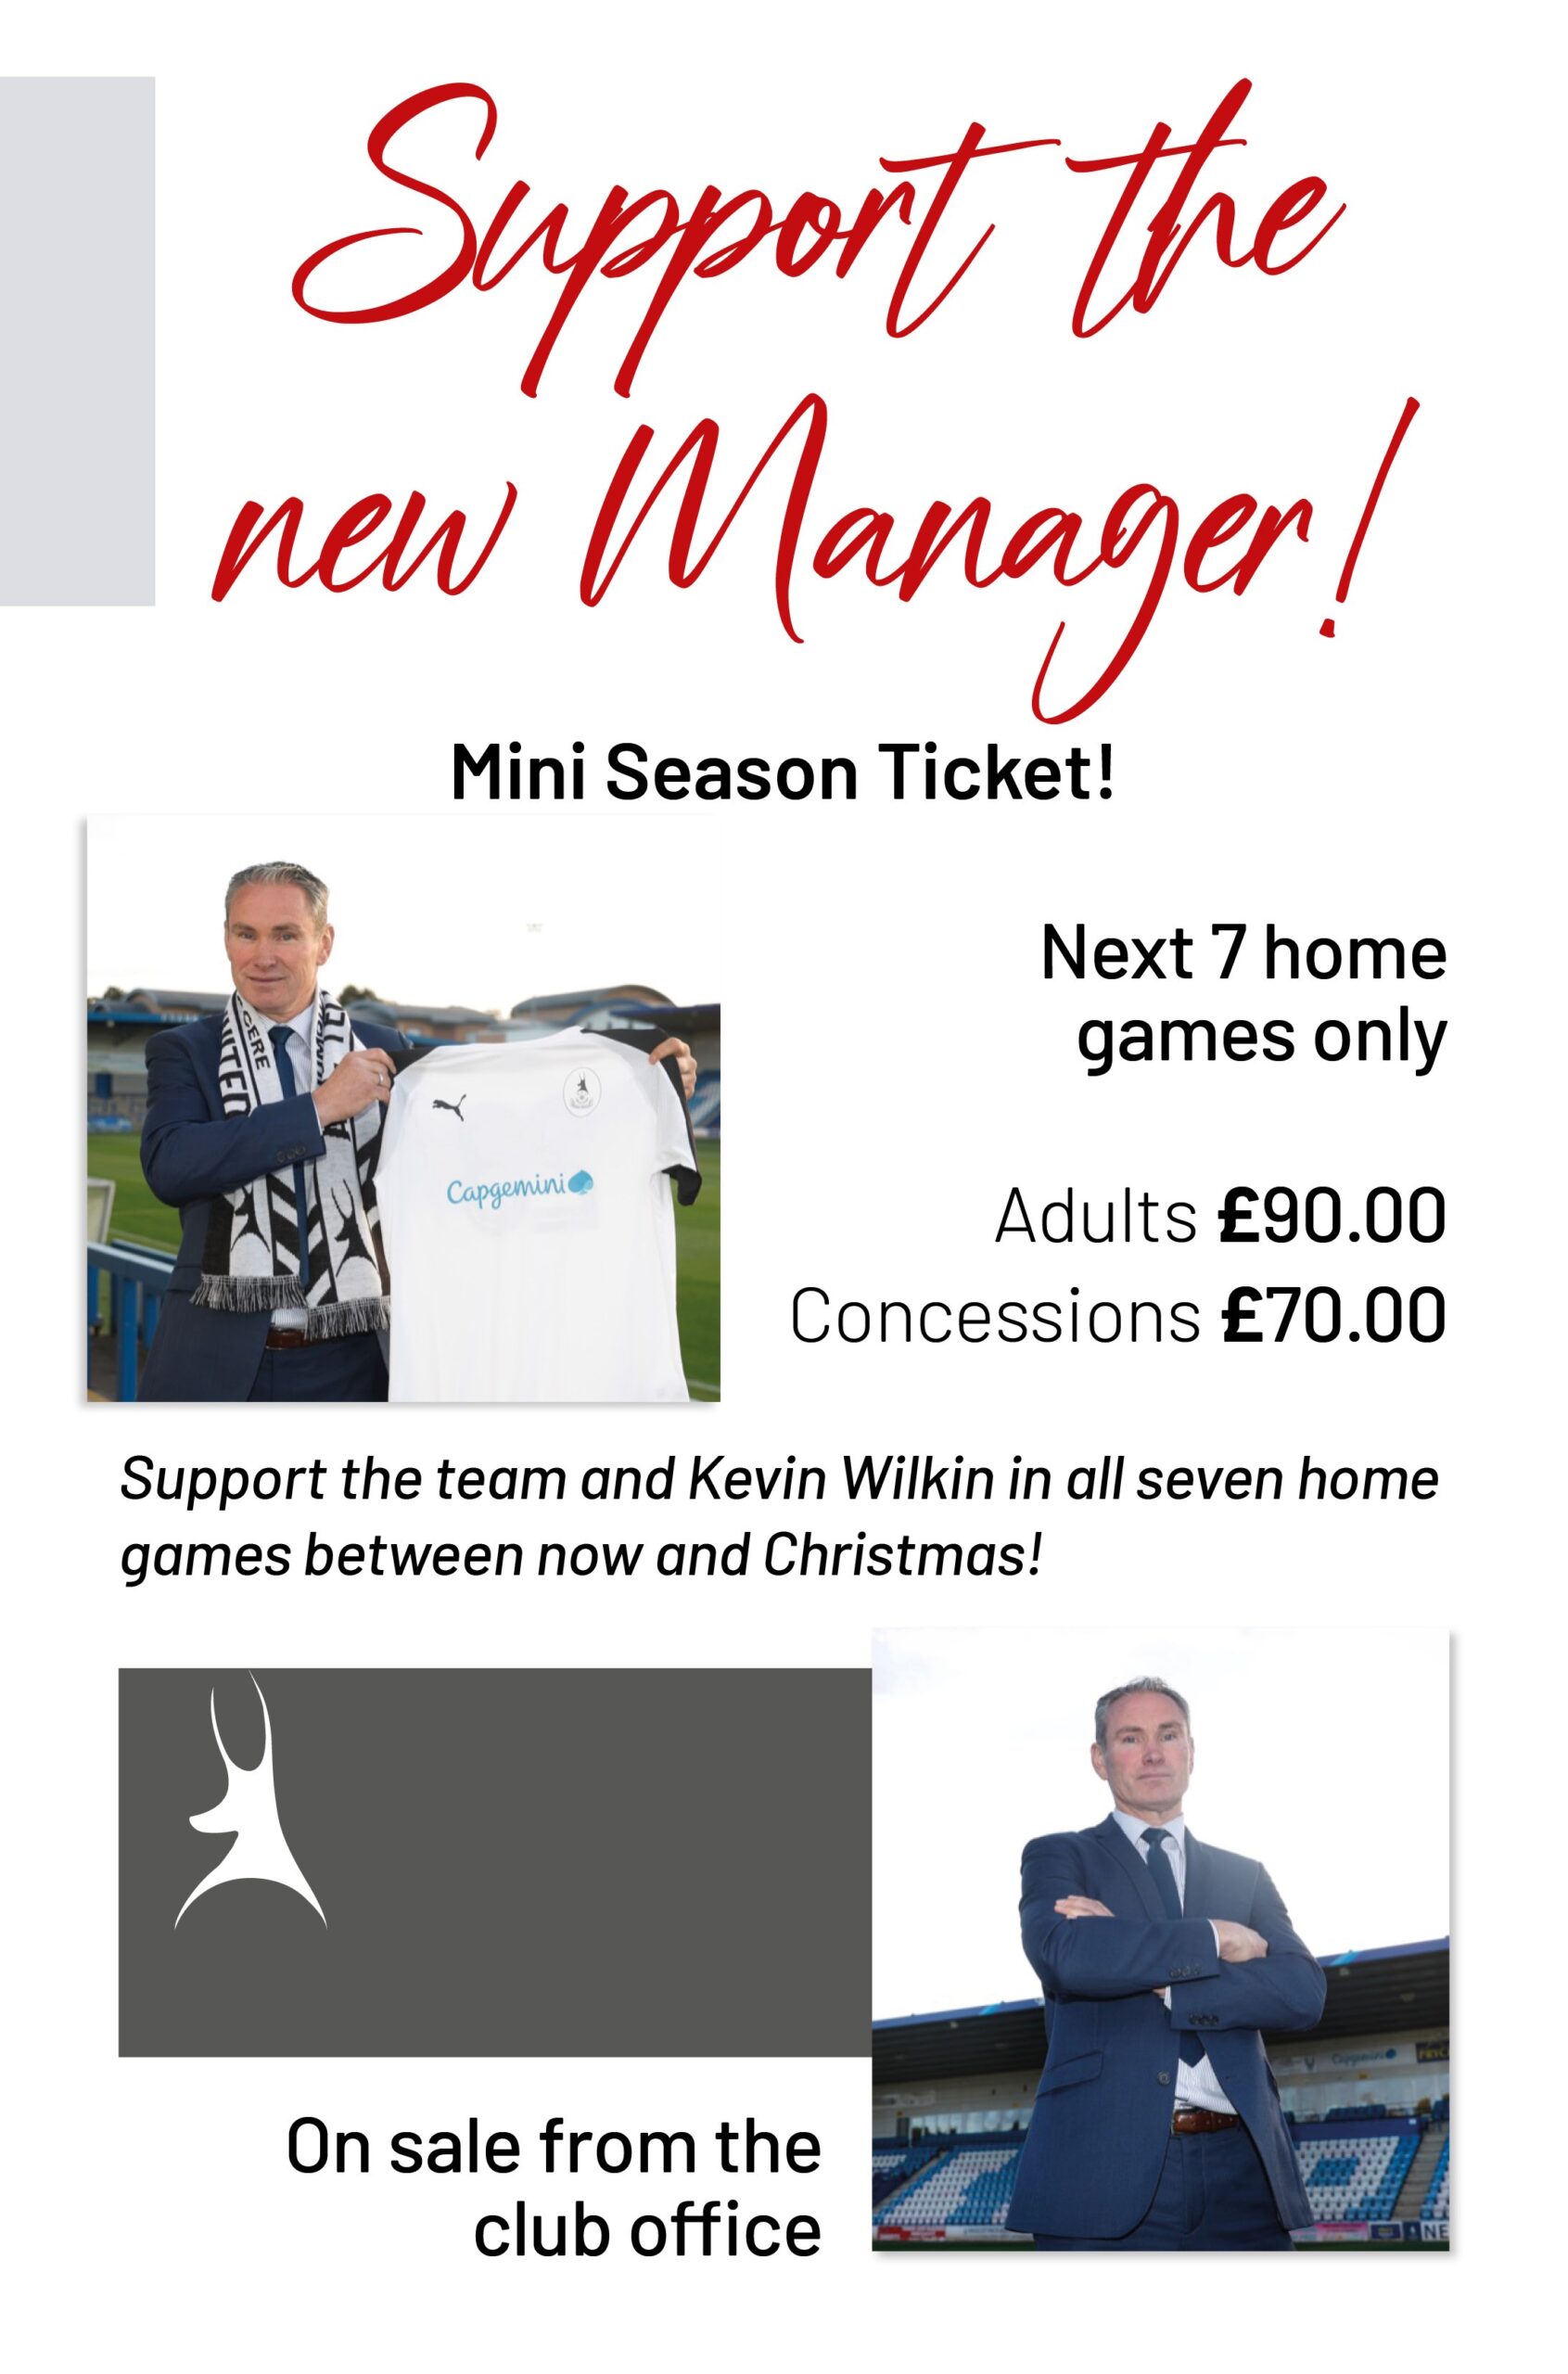 Support the new manager: